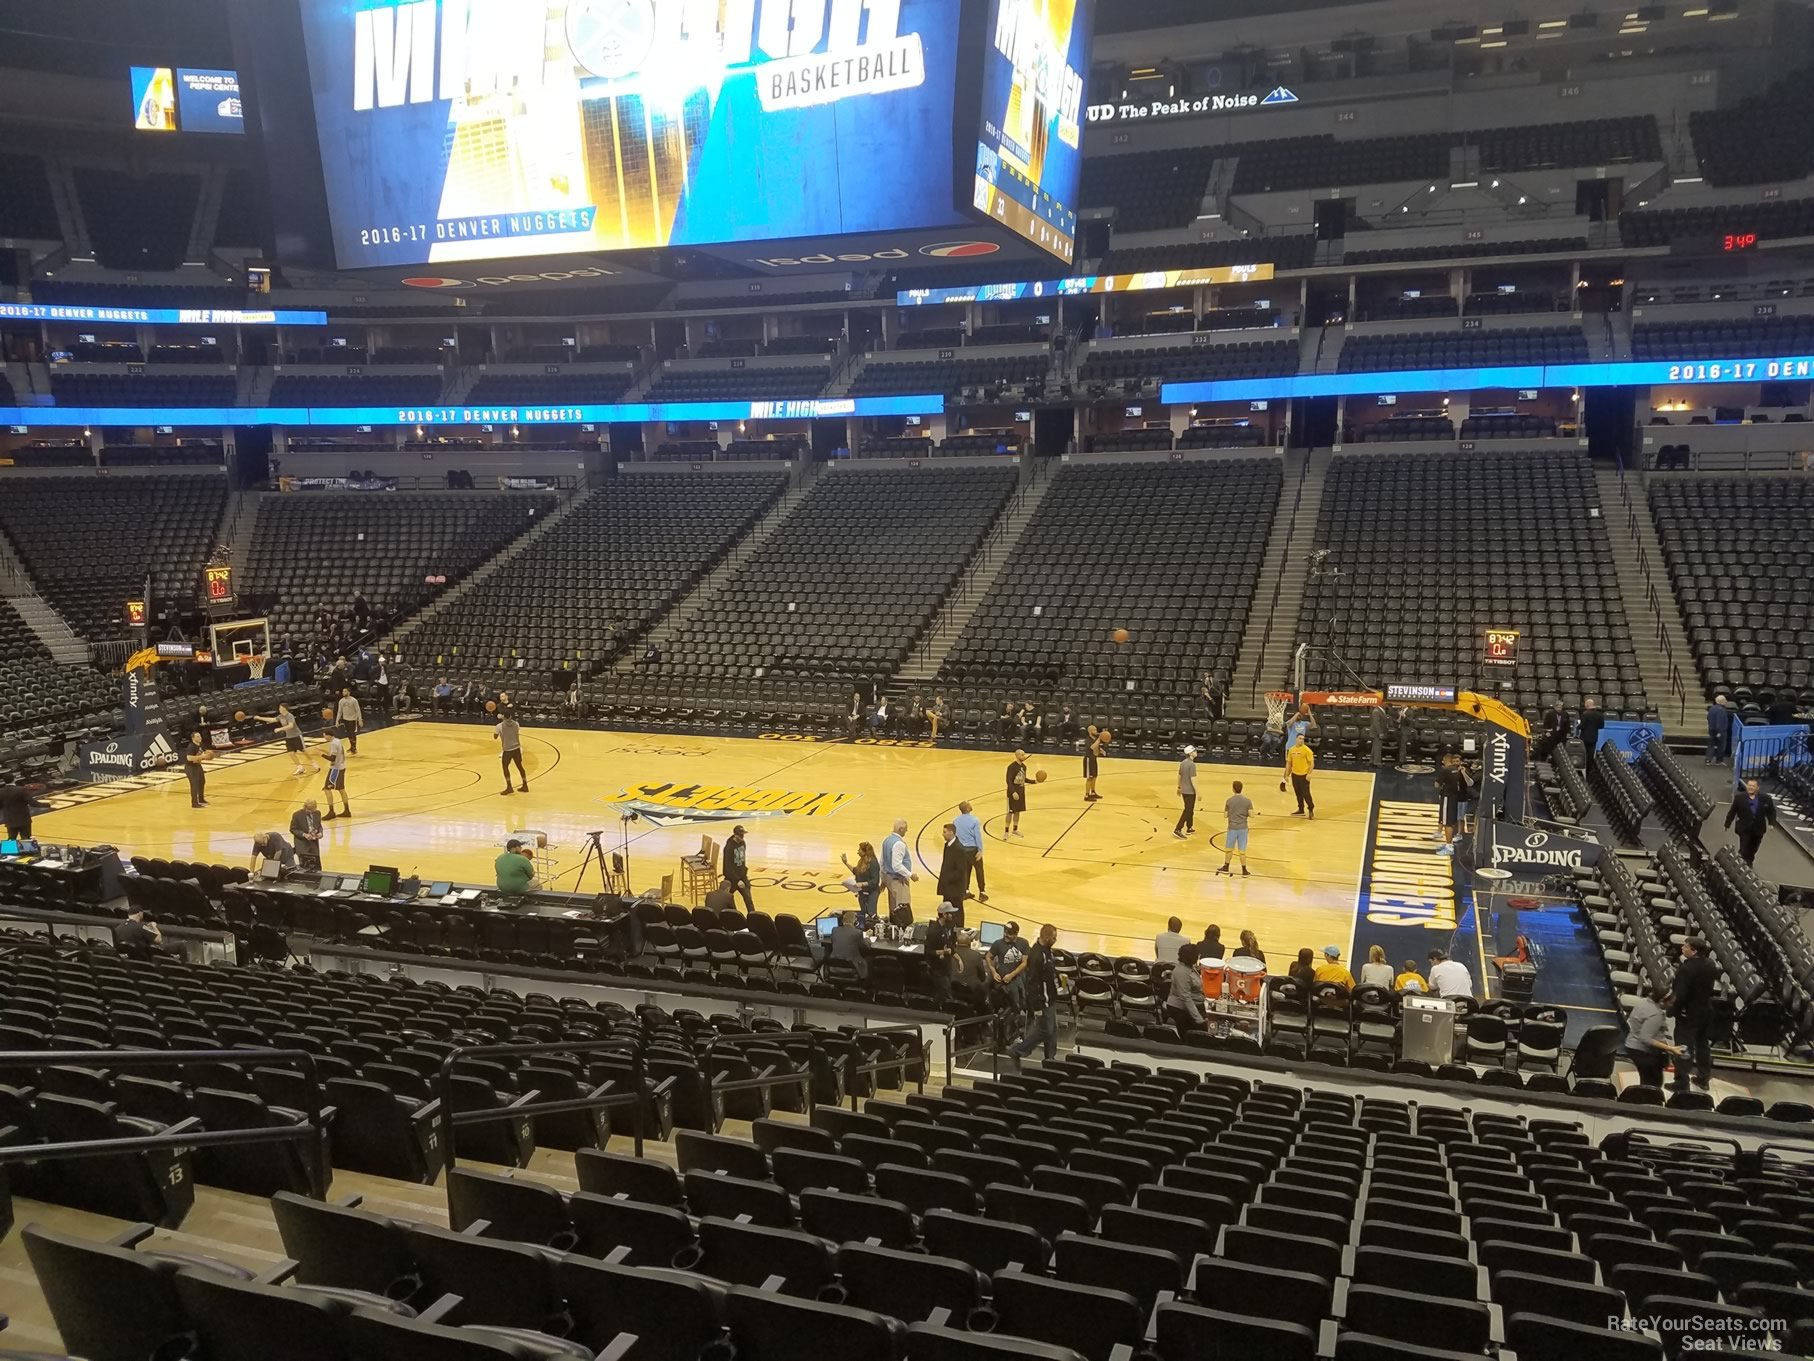 section 146, row 19 seat view  for basketball - ball arena